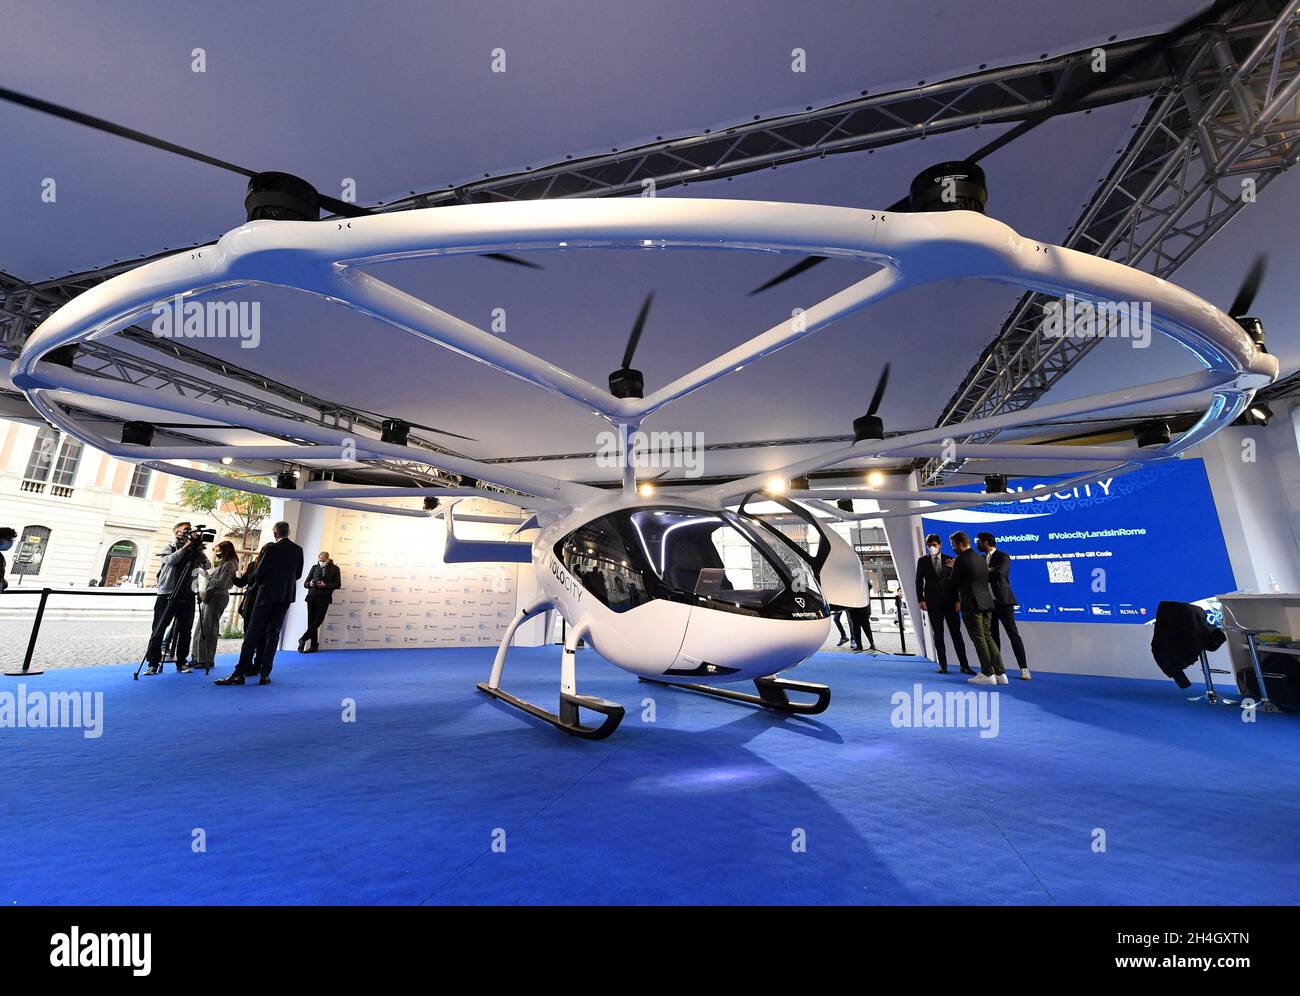 Rome, Italy on November 2, 2021. A VoloCity air taxi is exhibited in Rome, Italy on November 2, 2021. The new service will connect Rome s international airport with vertical airports across the city, reducing both traffic congestion and CO2 emissions. Rome is one of the first cities in Europe to commit to bringing urban air mobility services to its citizens with Volocopter. Paris has also committed to a collaboration to bring electric air taxis to the city in time for the 2024 Olympic Games. Urban air mobility will be part of the solution for heavily congested city centers across the world. As Stock Photo